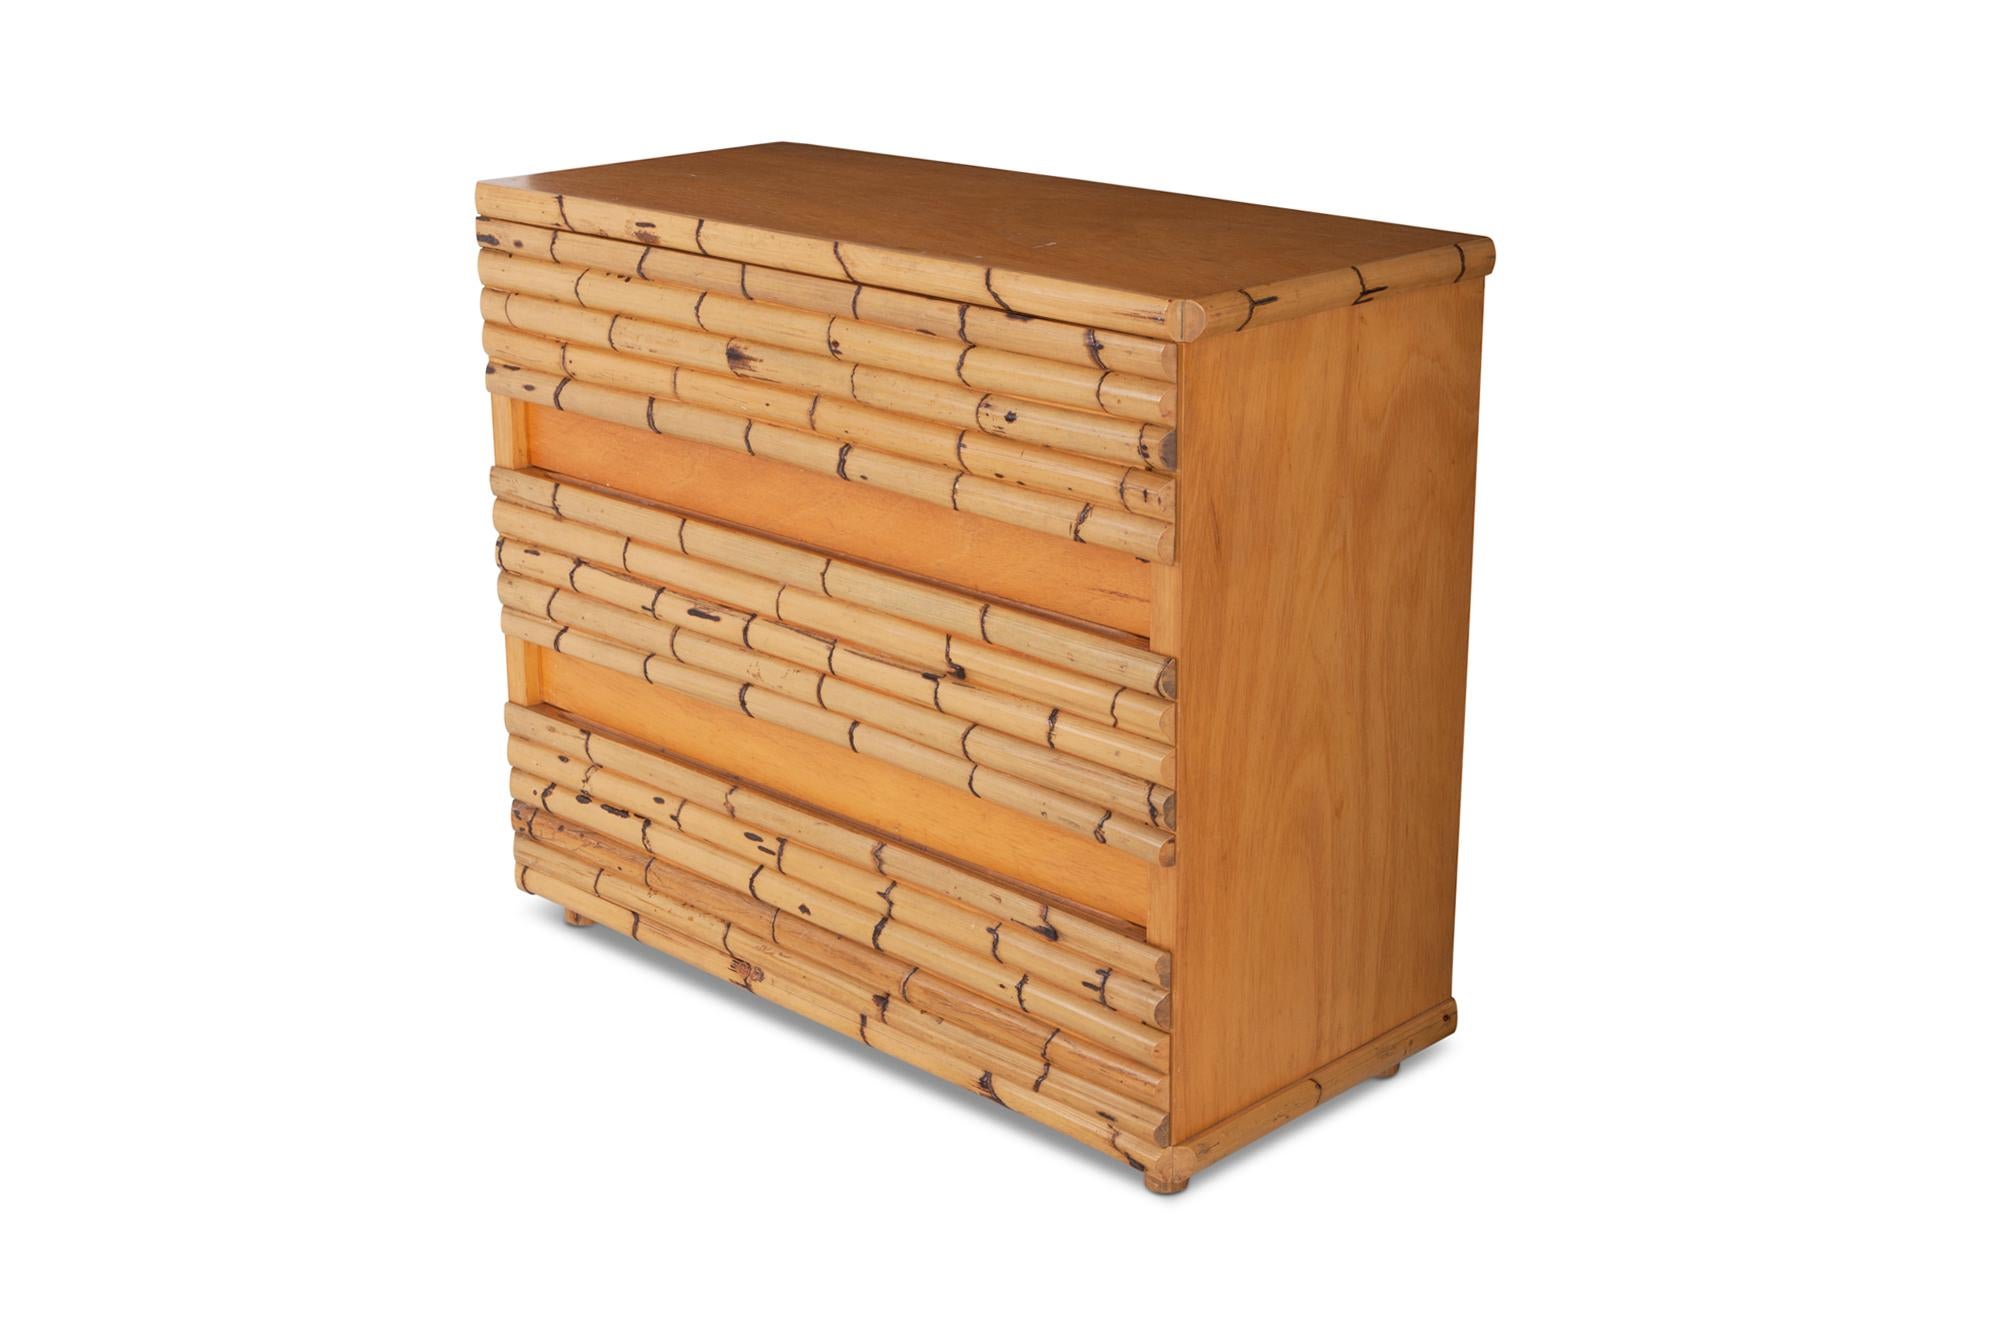 Late 20th Century Bamboo Chest of Drawers    by Venturini